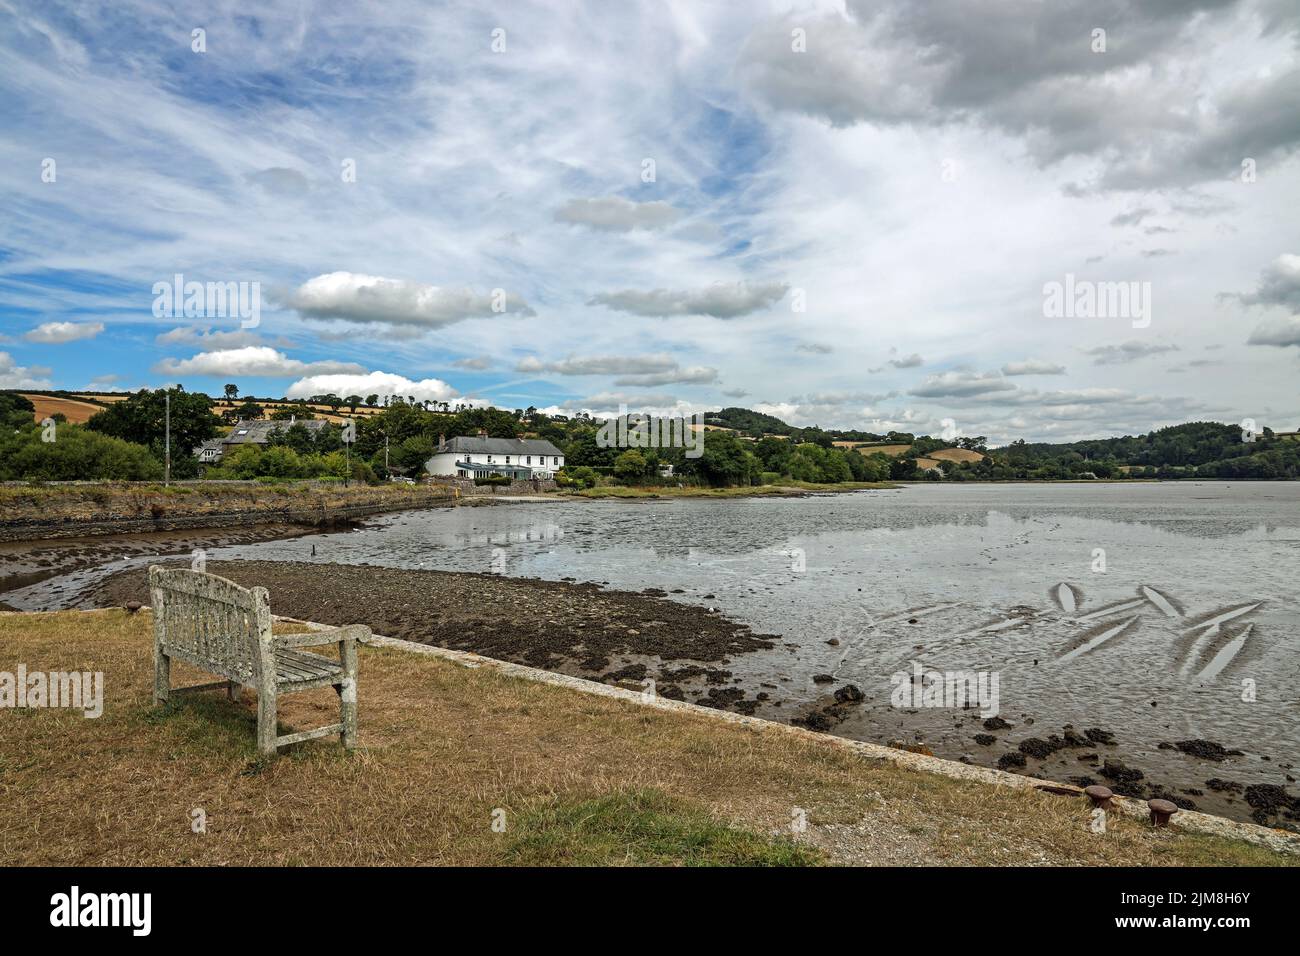 Cottages on the banks of the River Tavy seen from the quayside at Bere Ferrers. The tide is low with patterns in the river bed. Stock Photo